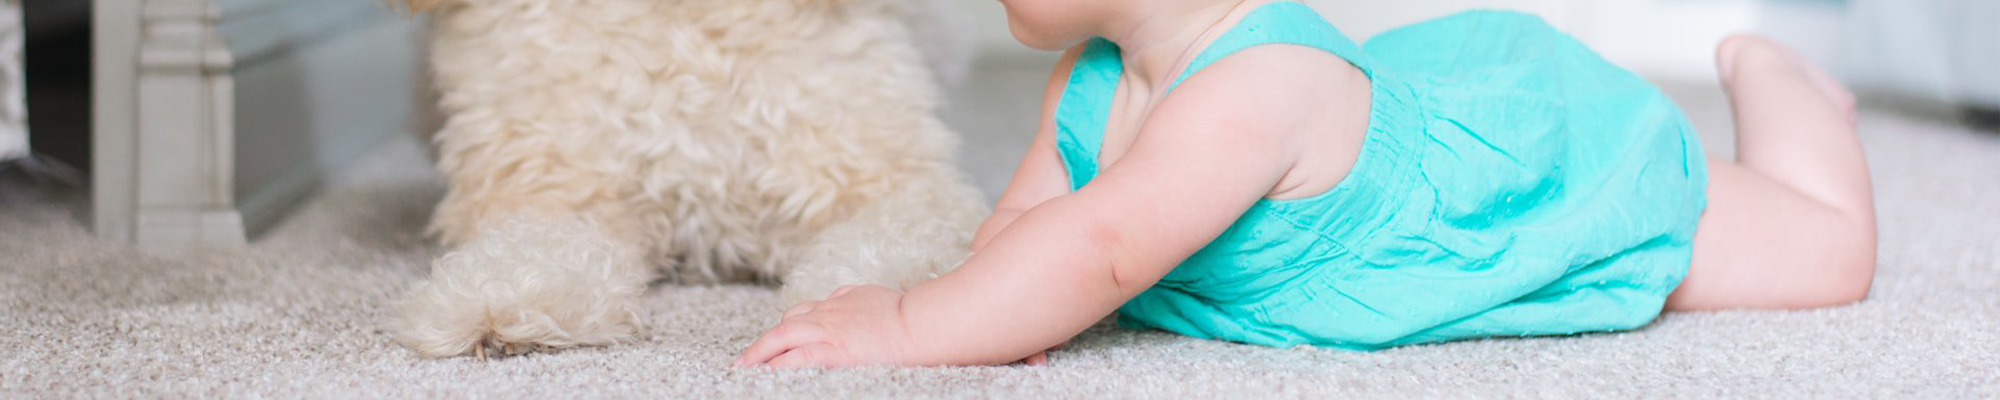 baby and dog on carpet